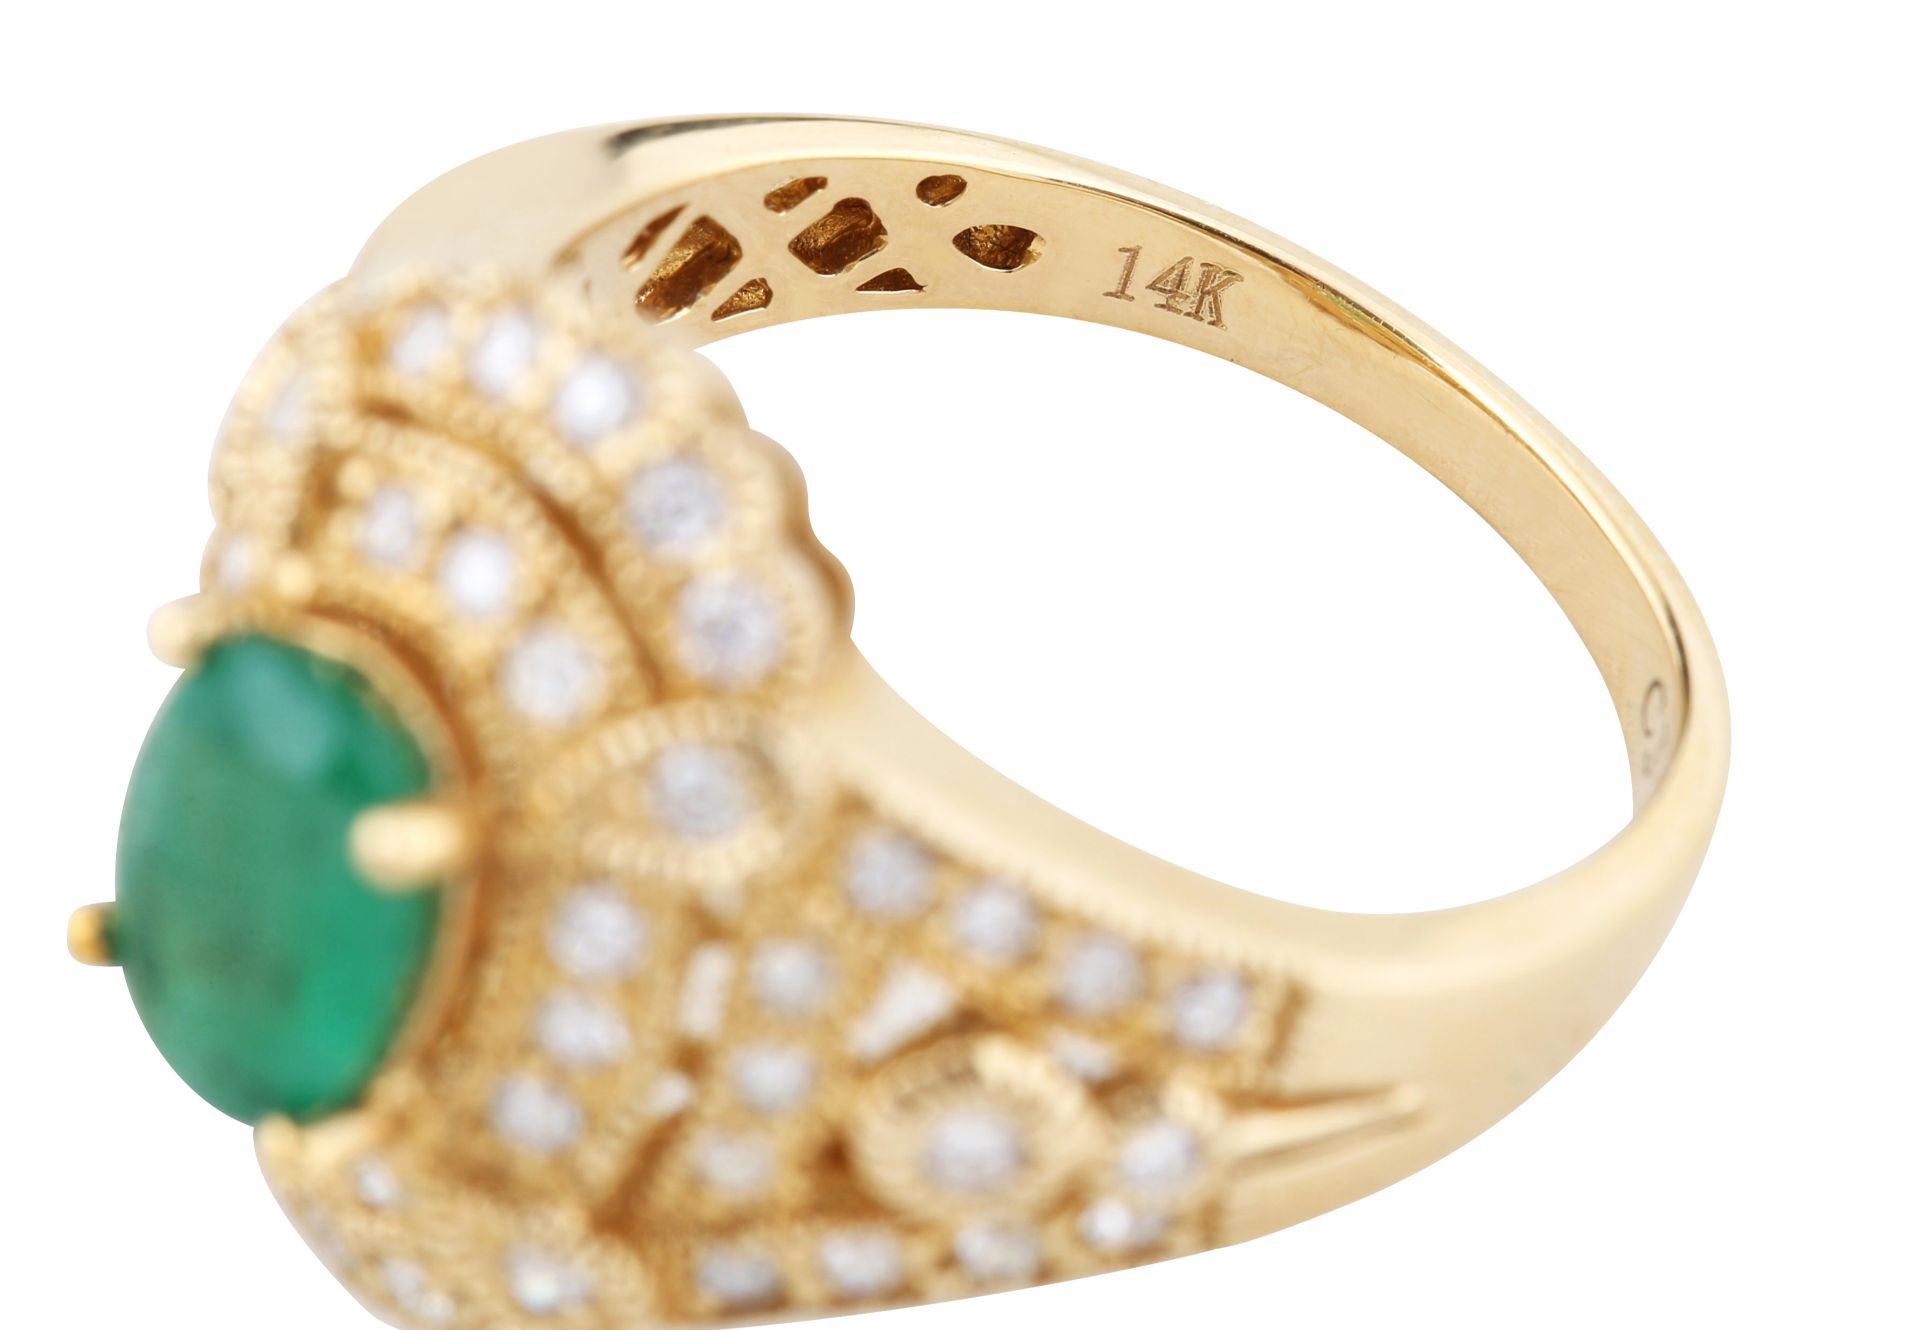 EMERALD AND DIAMOND 14KT GOLD RING - Image 4 of 4